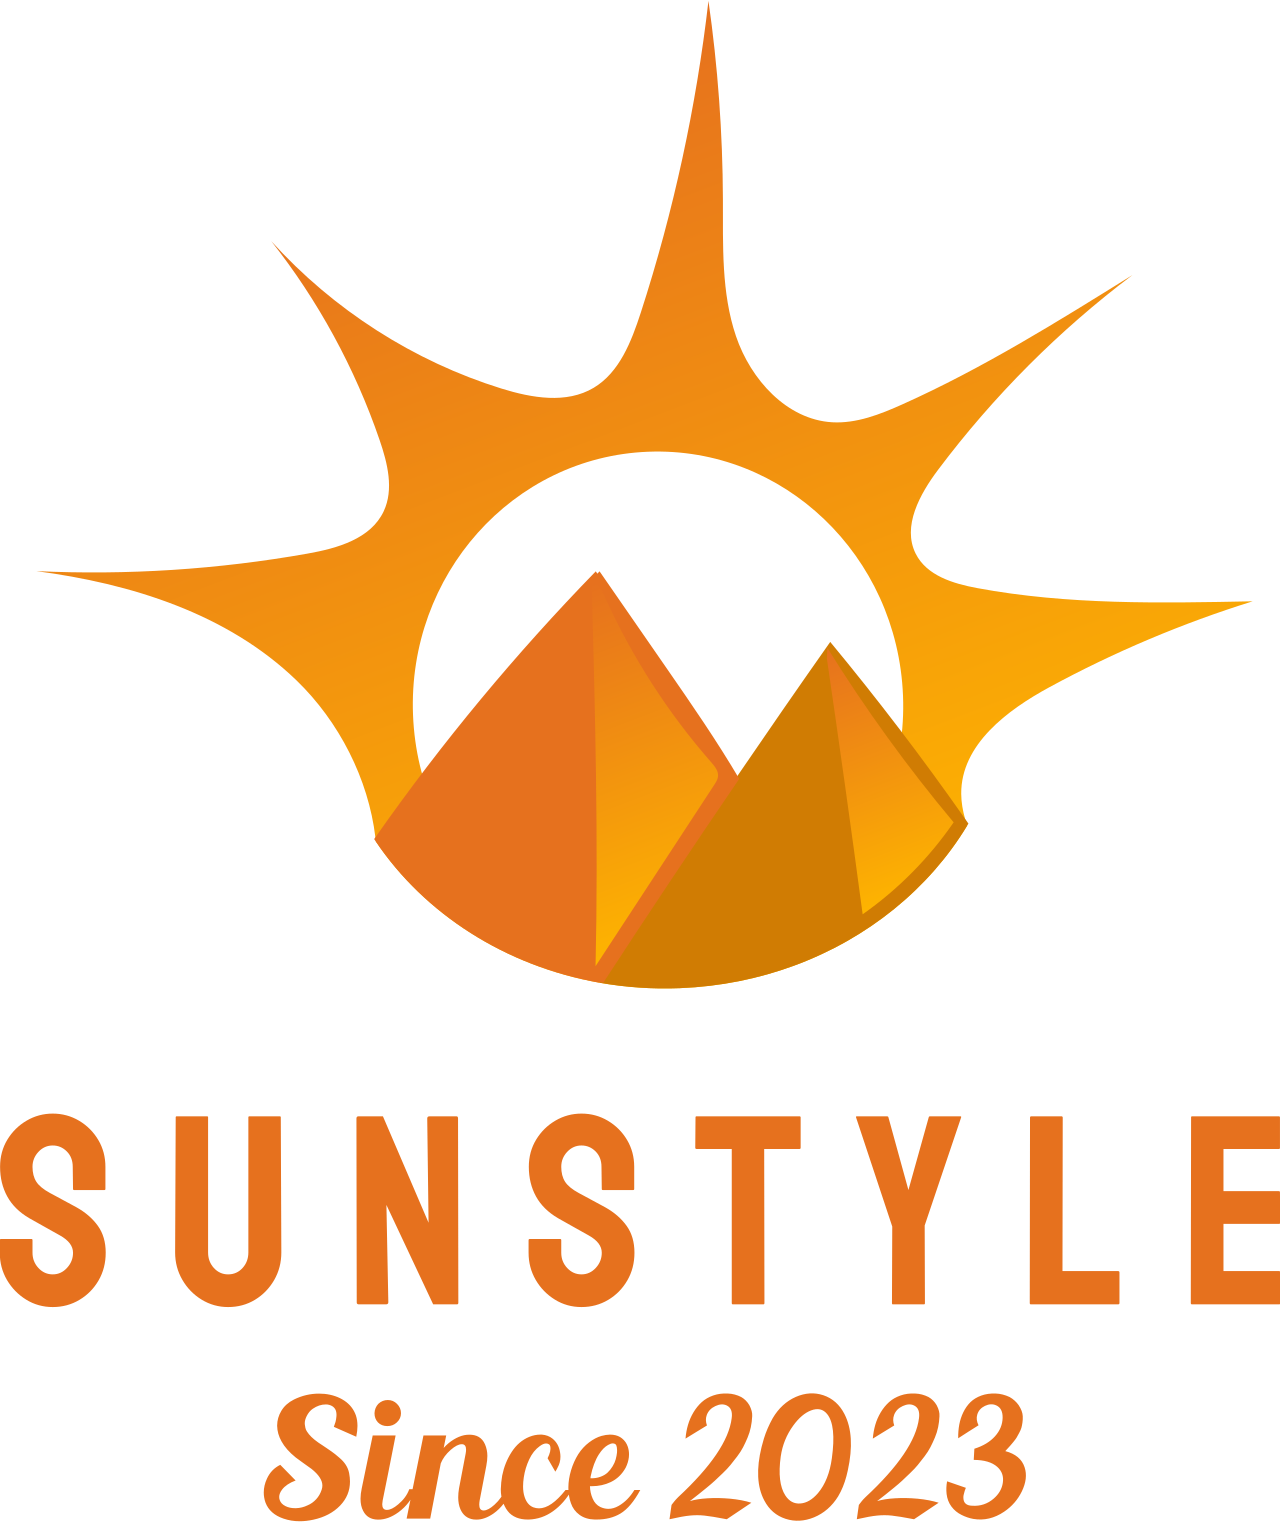 SunStyle's web page